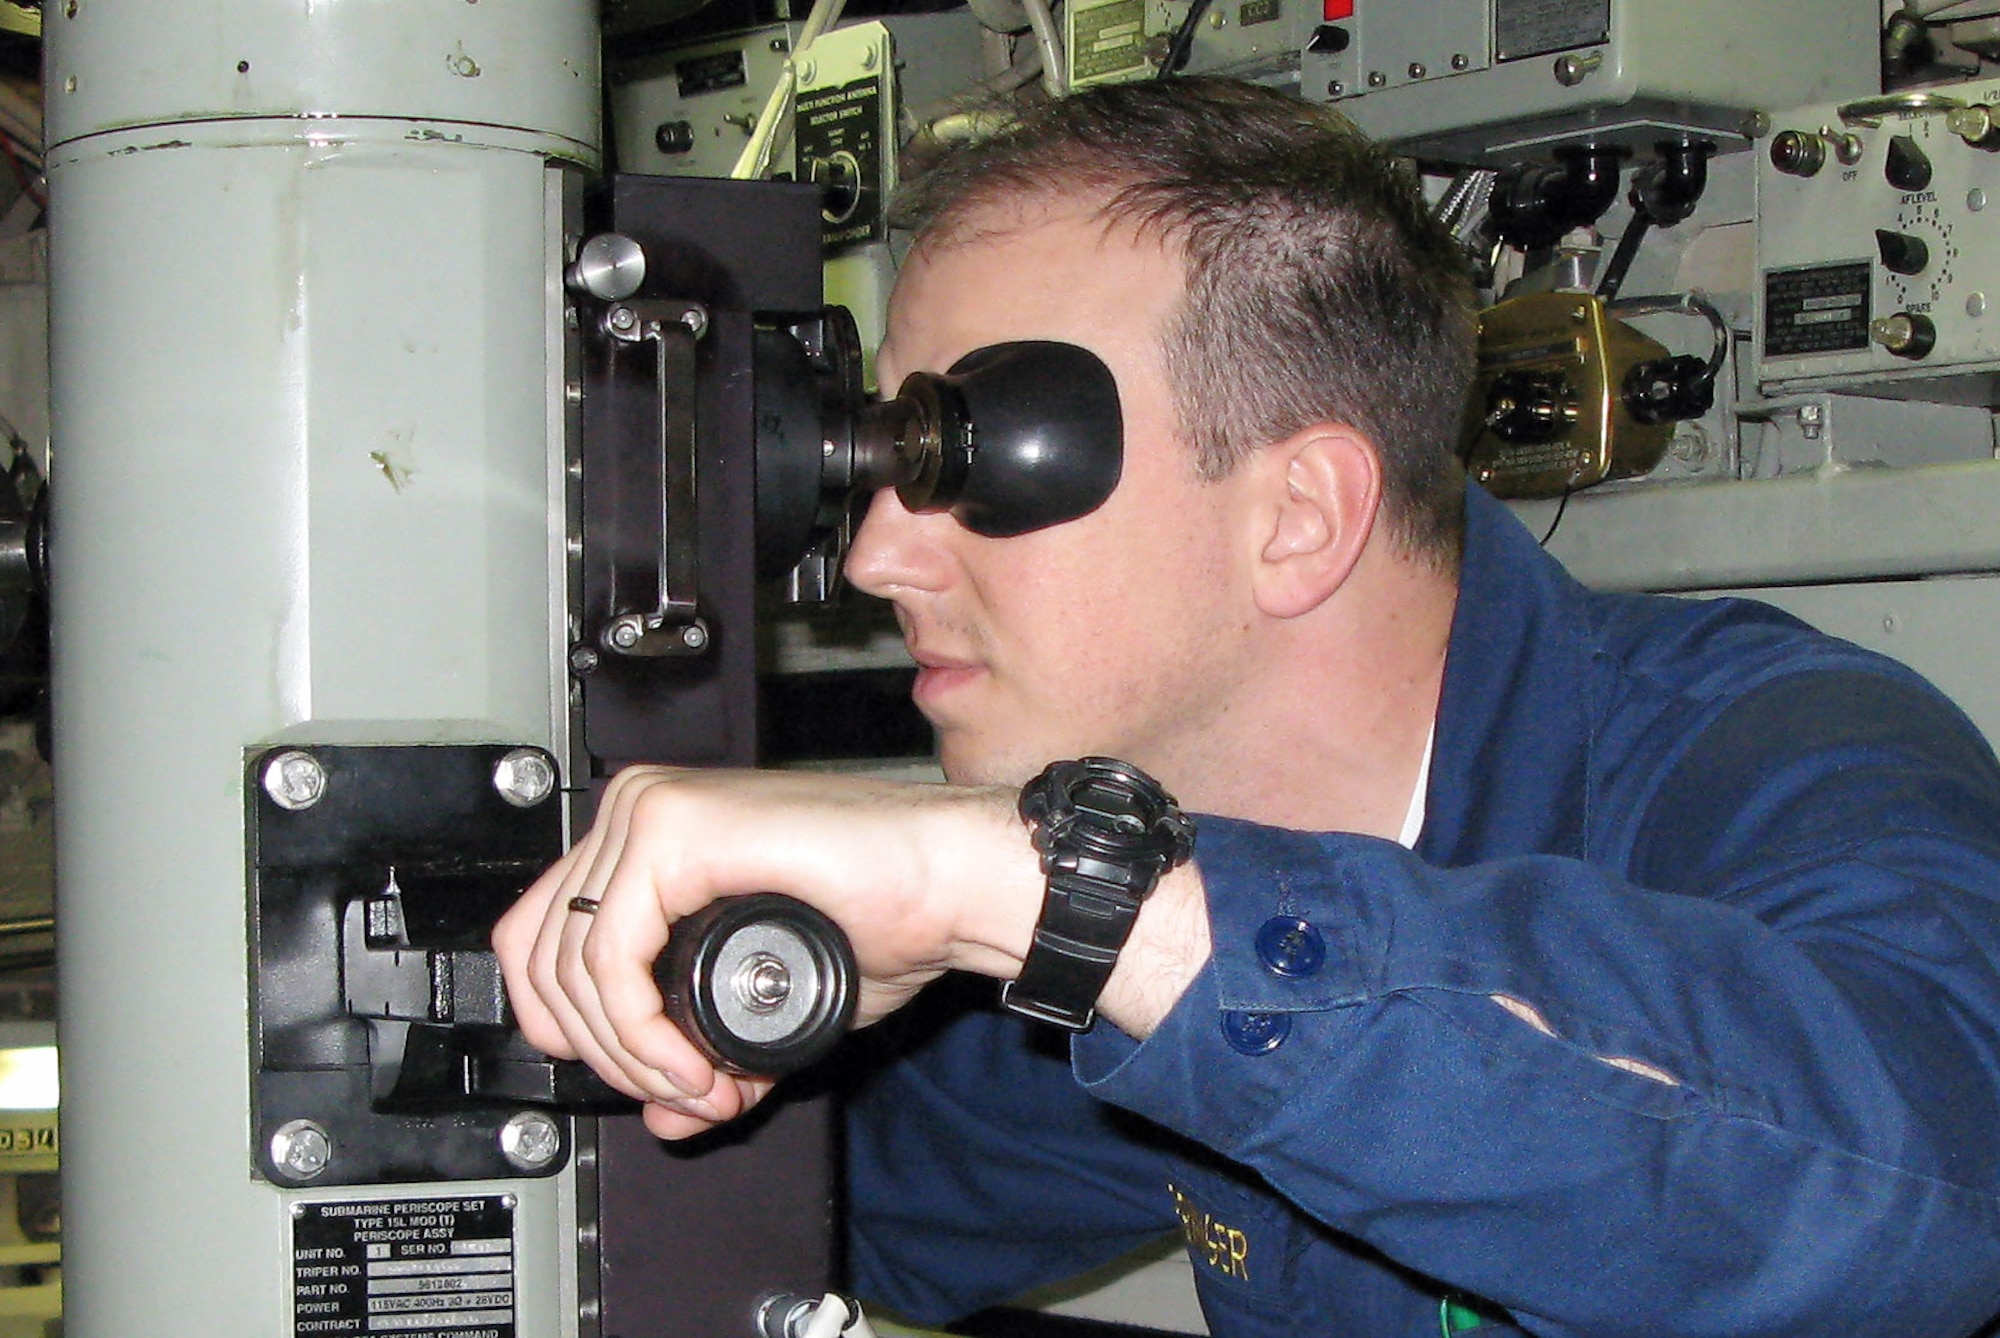 The USS Maryland's "Gold" crew executive officer, Navy Lt. Cmdr. Louis J. Springer, takes a look through the vessel's periscope Feb. 17.  (Department of Defense photo/Gerry J. Gilmore)